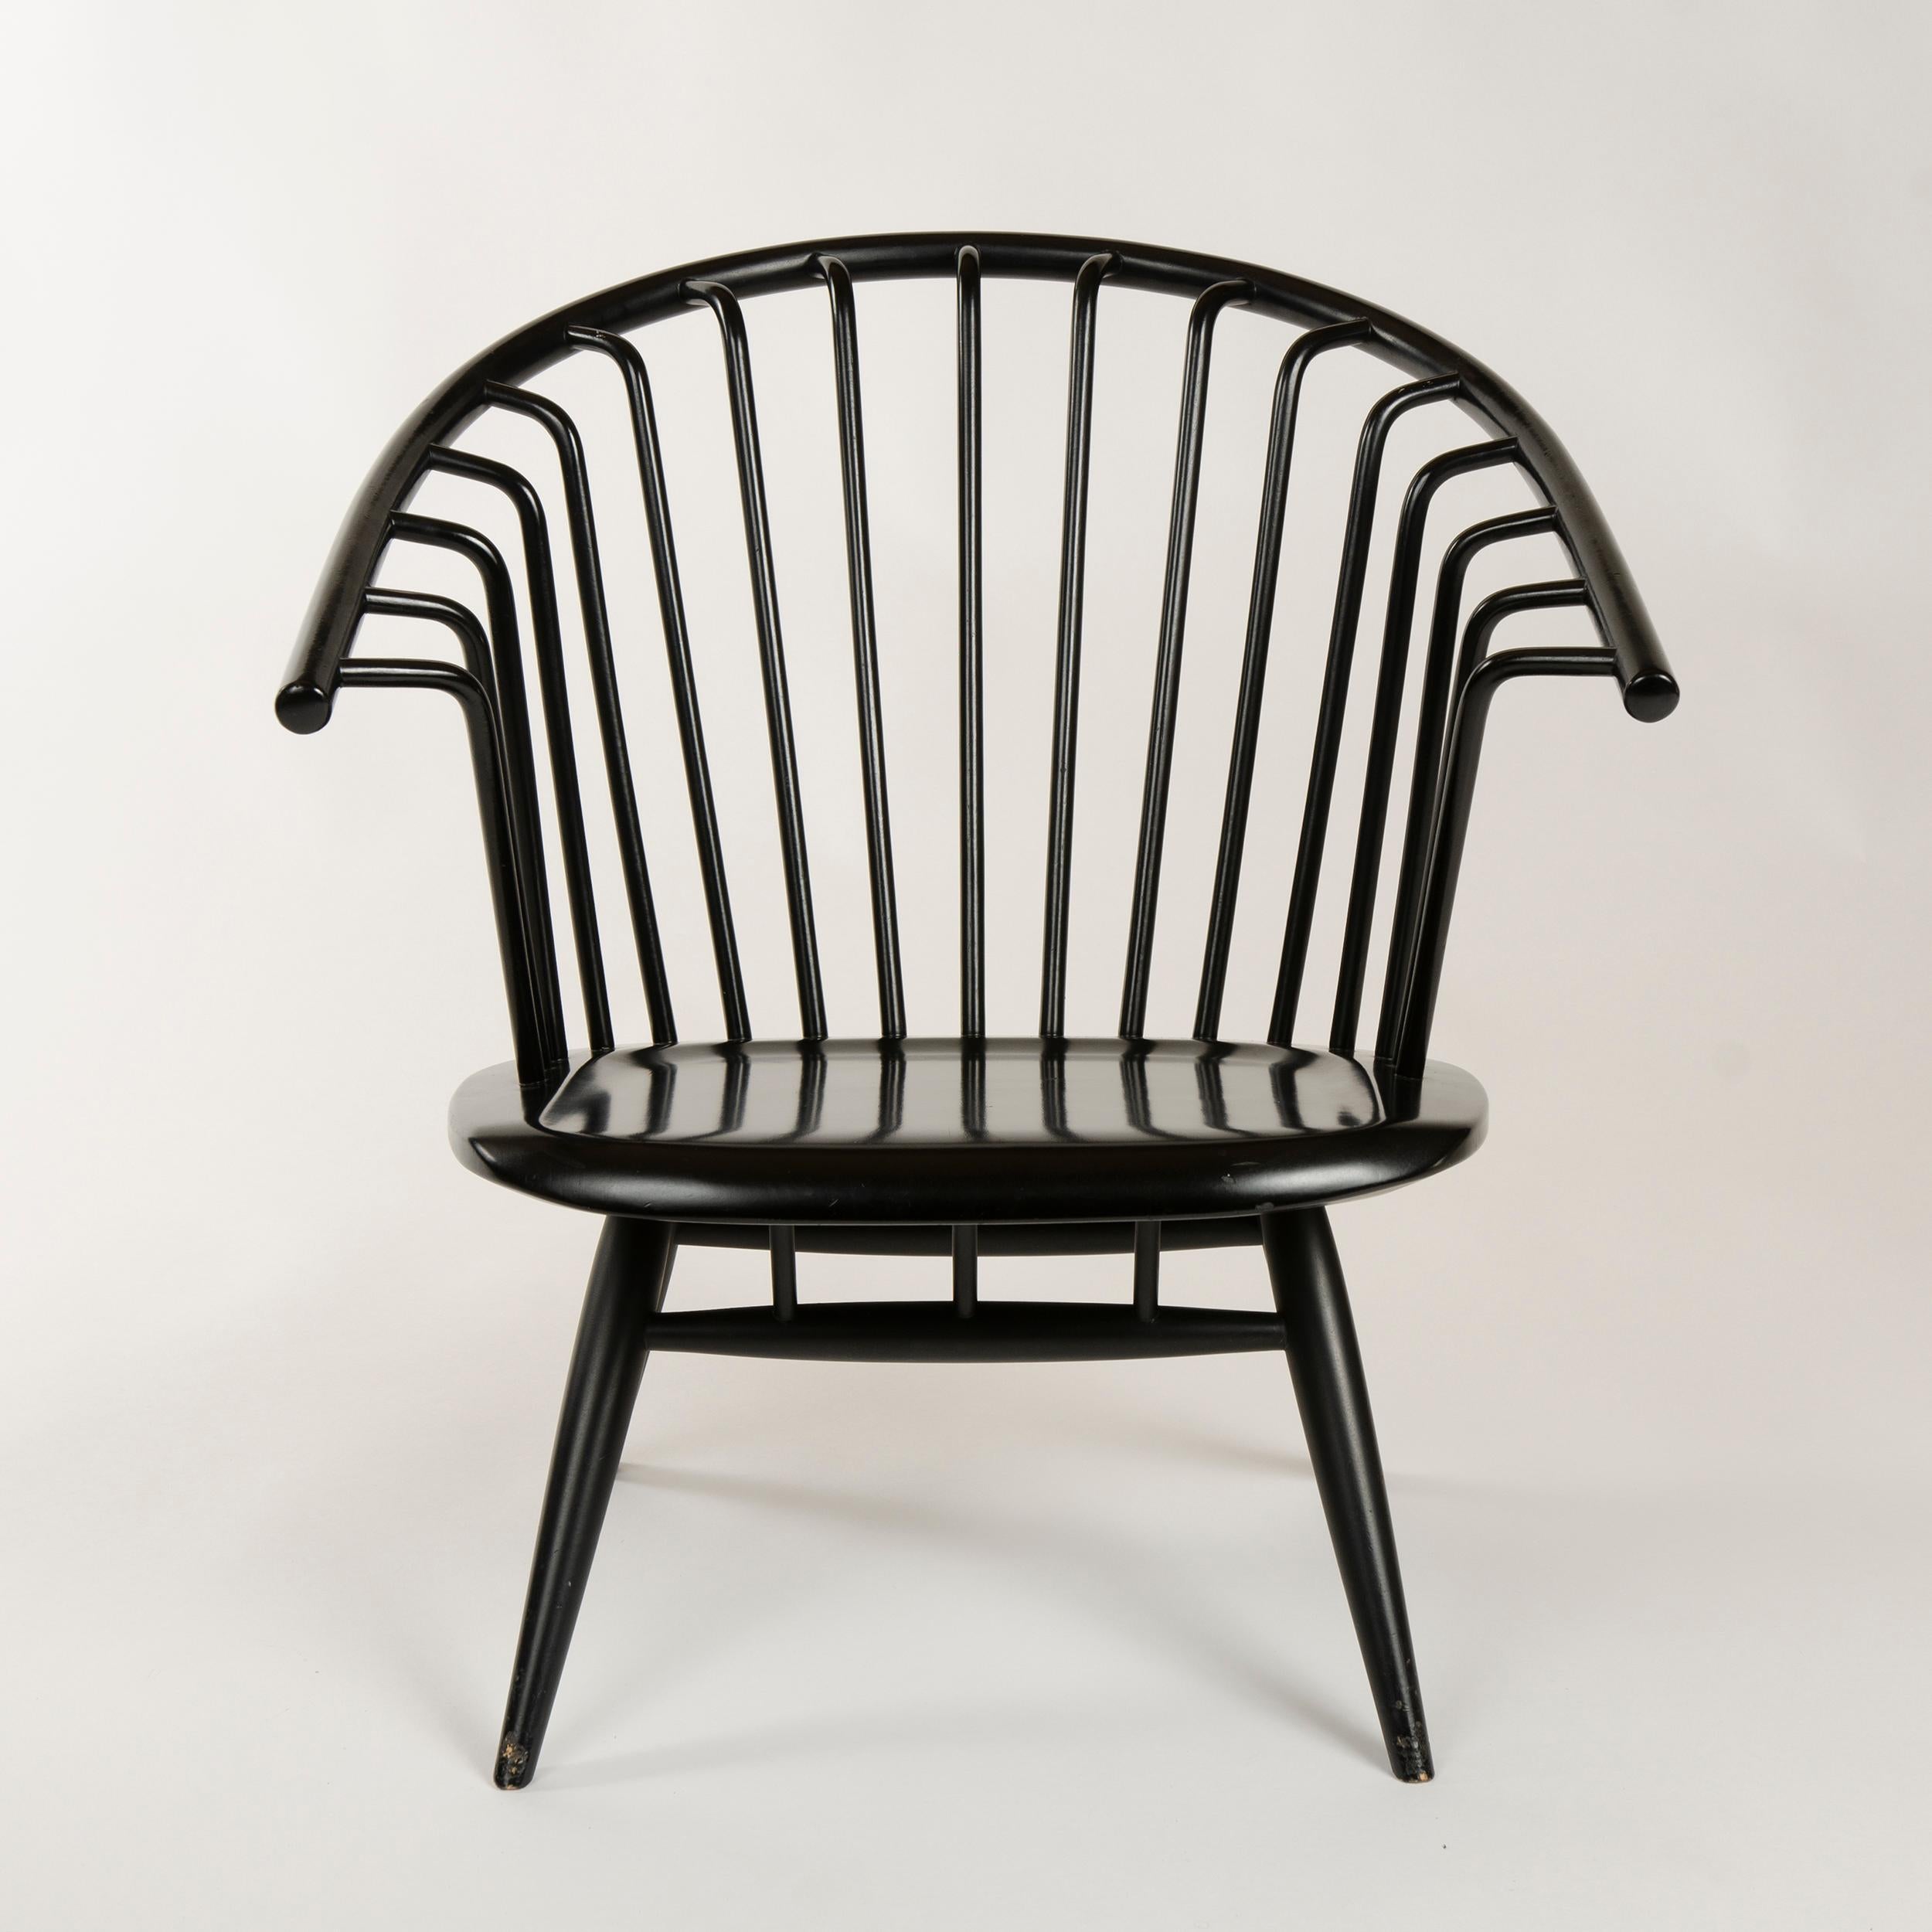 A pair of black painted birch 'Crinolette' lounge chairs with bent wood spokes tenon-joined to the solid bent back rest, maintaining original 'Asko Export' stickers.